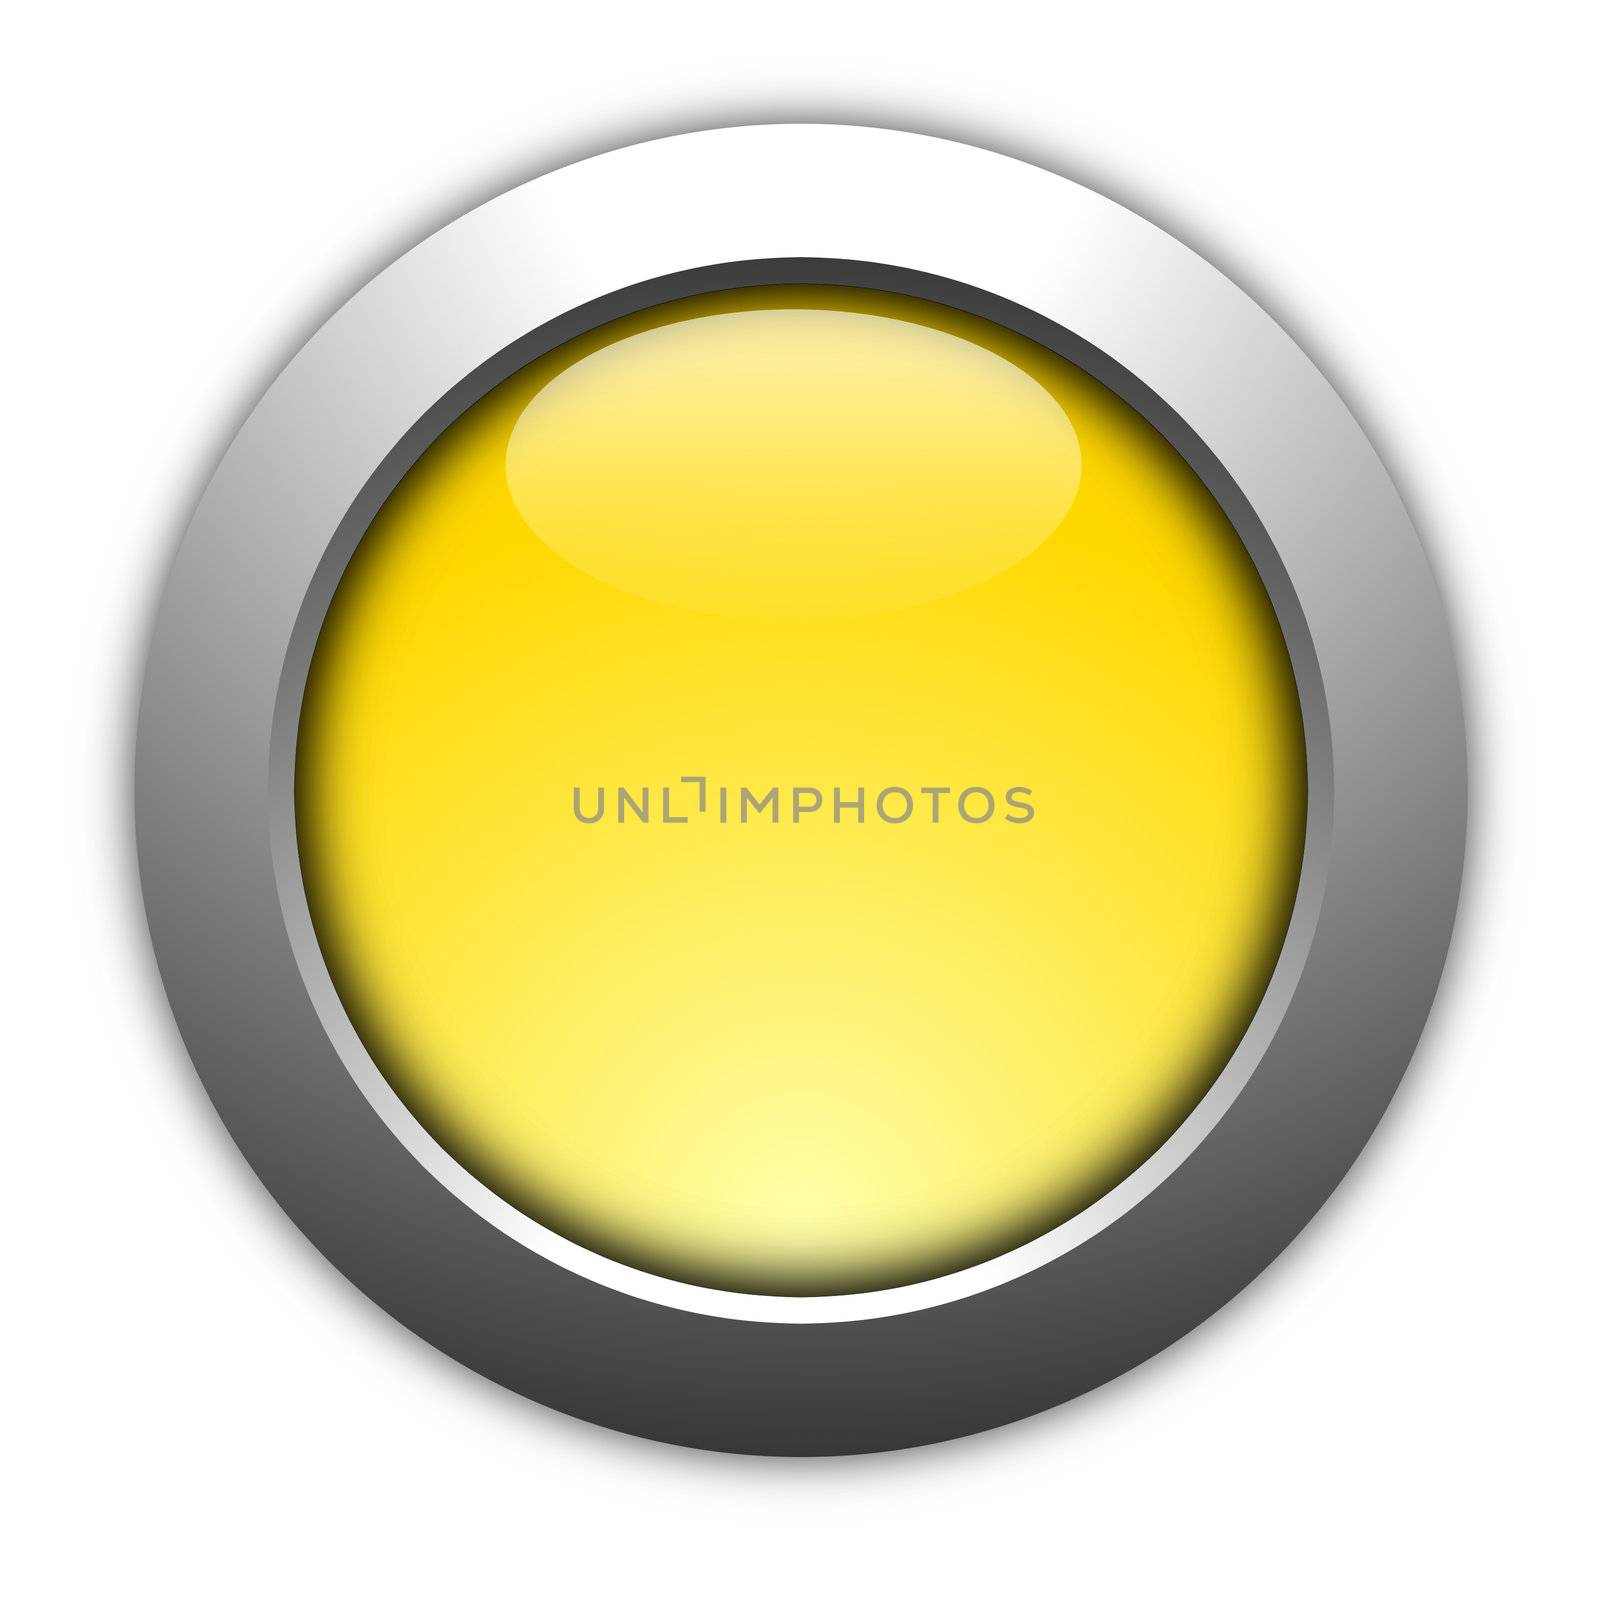 blank illustration of a button with copyspace